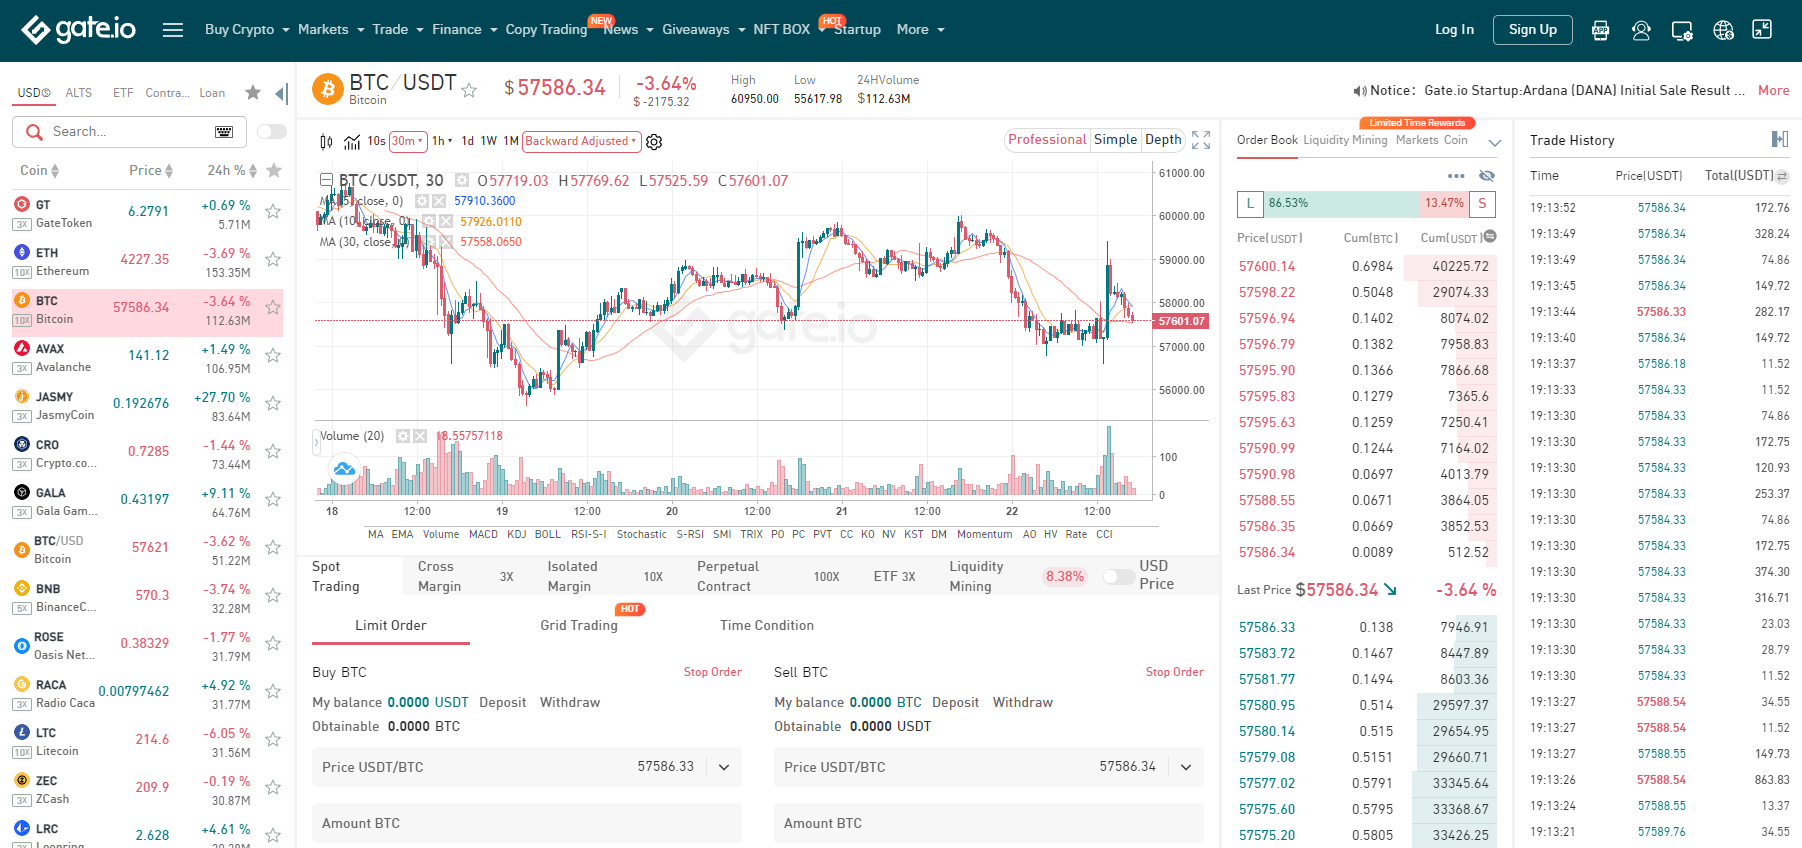 Gate.io trading interface overview.